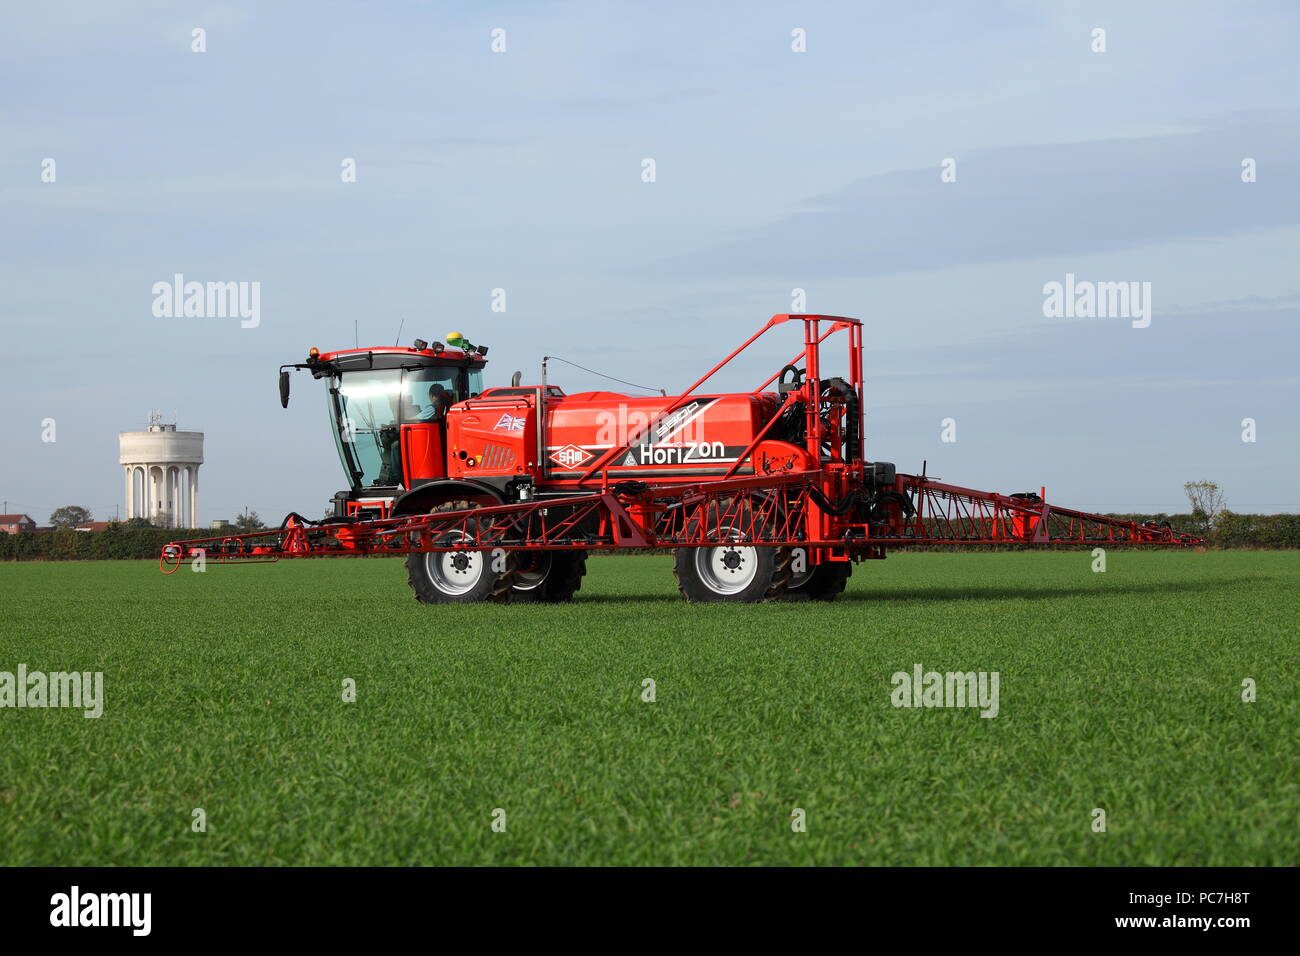 A SAM - Sands Agricultural Machinery -  self propelled crop sprayer. Seen here applying fertiliser / fertilizer to a young crop in the UK. Stock Photo